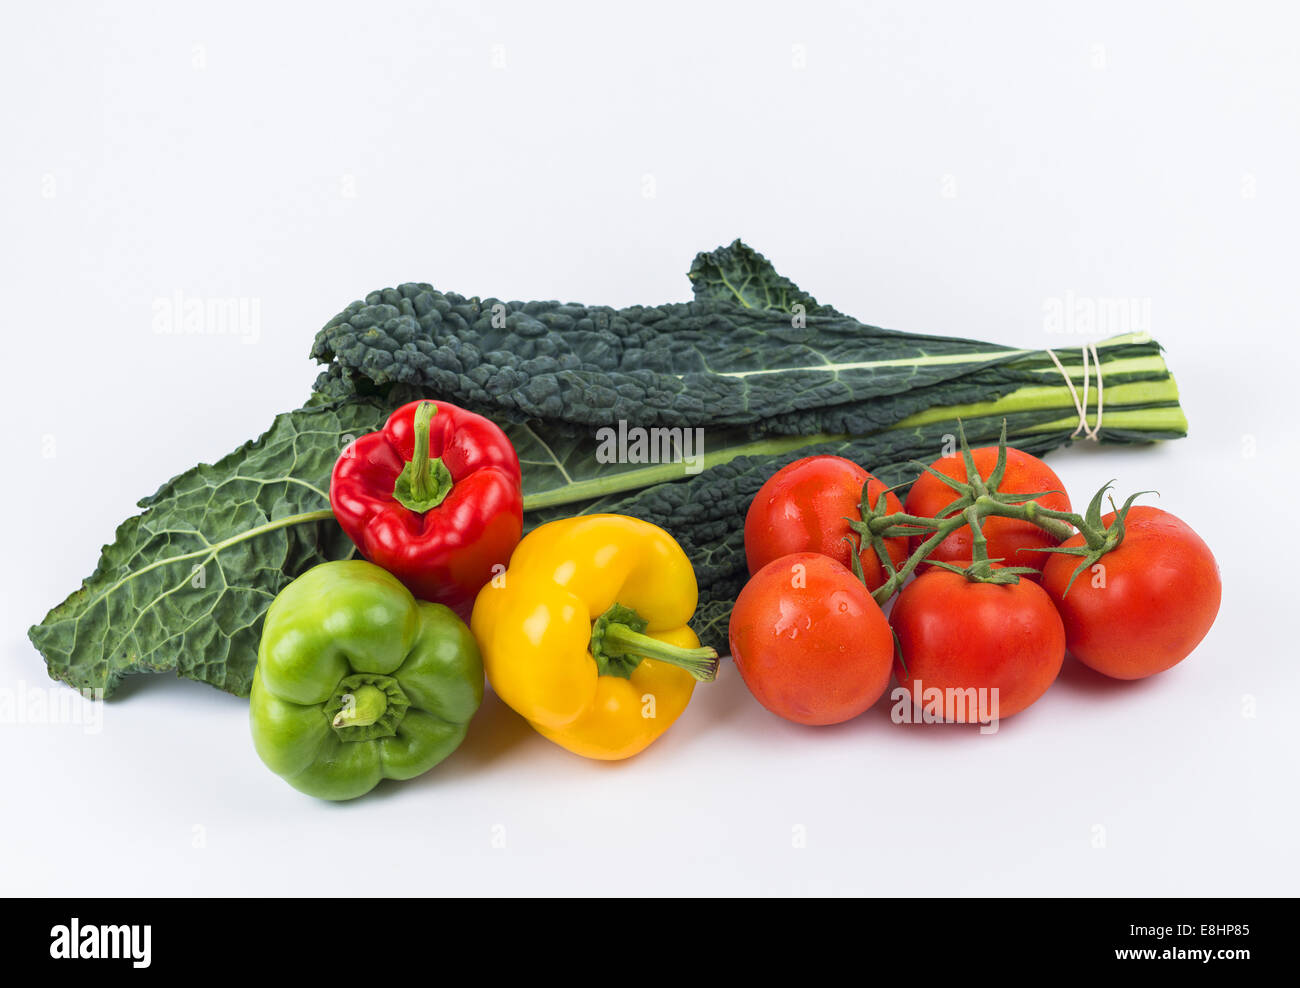 Mixed fruit and vegetables kale leaves red green yellow peppers tomatoes on stem Stock Photo